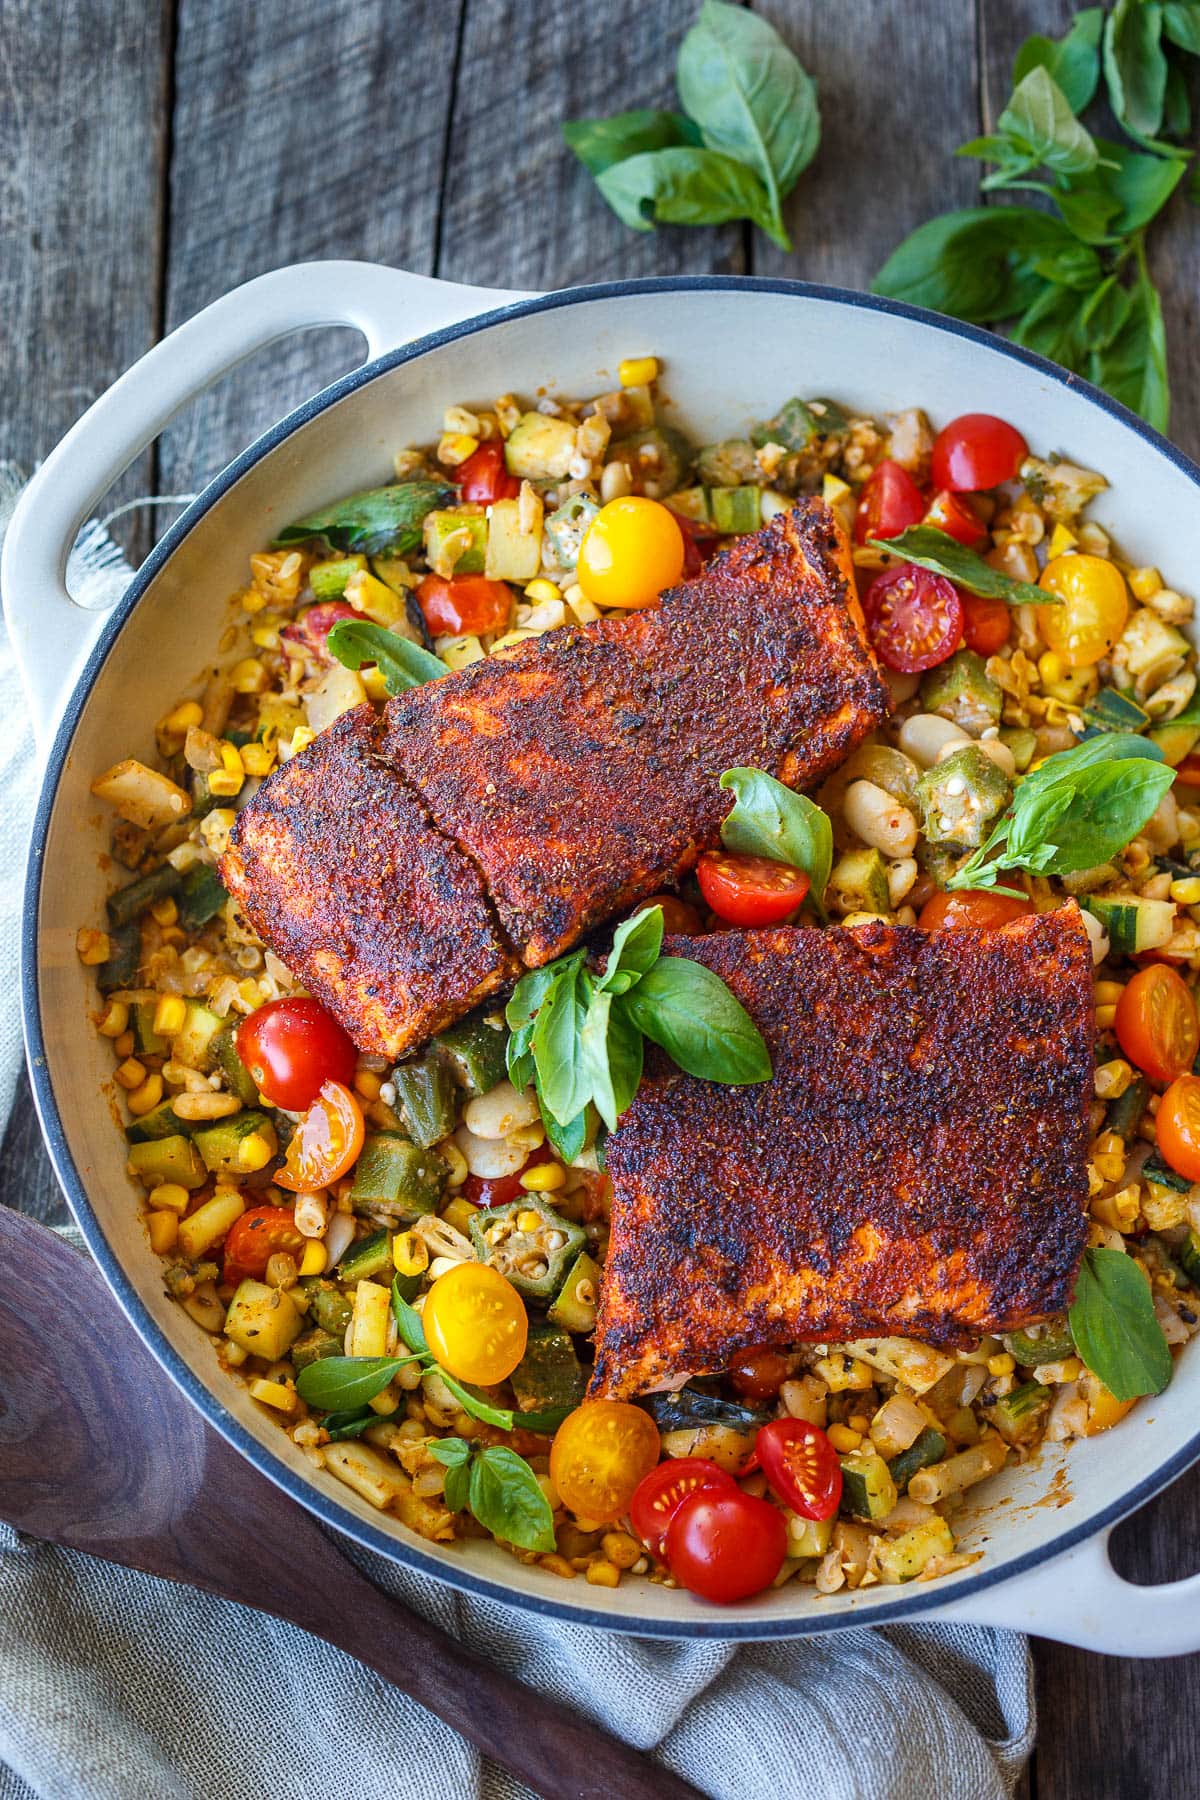 Harvest Succotash topped with Blackoned Salmon - abundant with fresh summer veggies & simple, clean flavors.  A delicious healthy side dish to pair with your choice of protein for a healthy delicious meal. Vegan and Gluten-free.